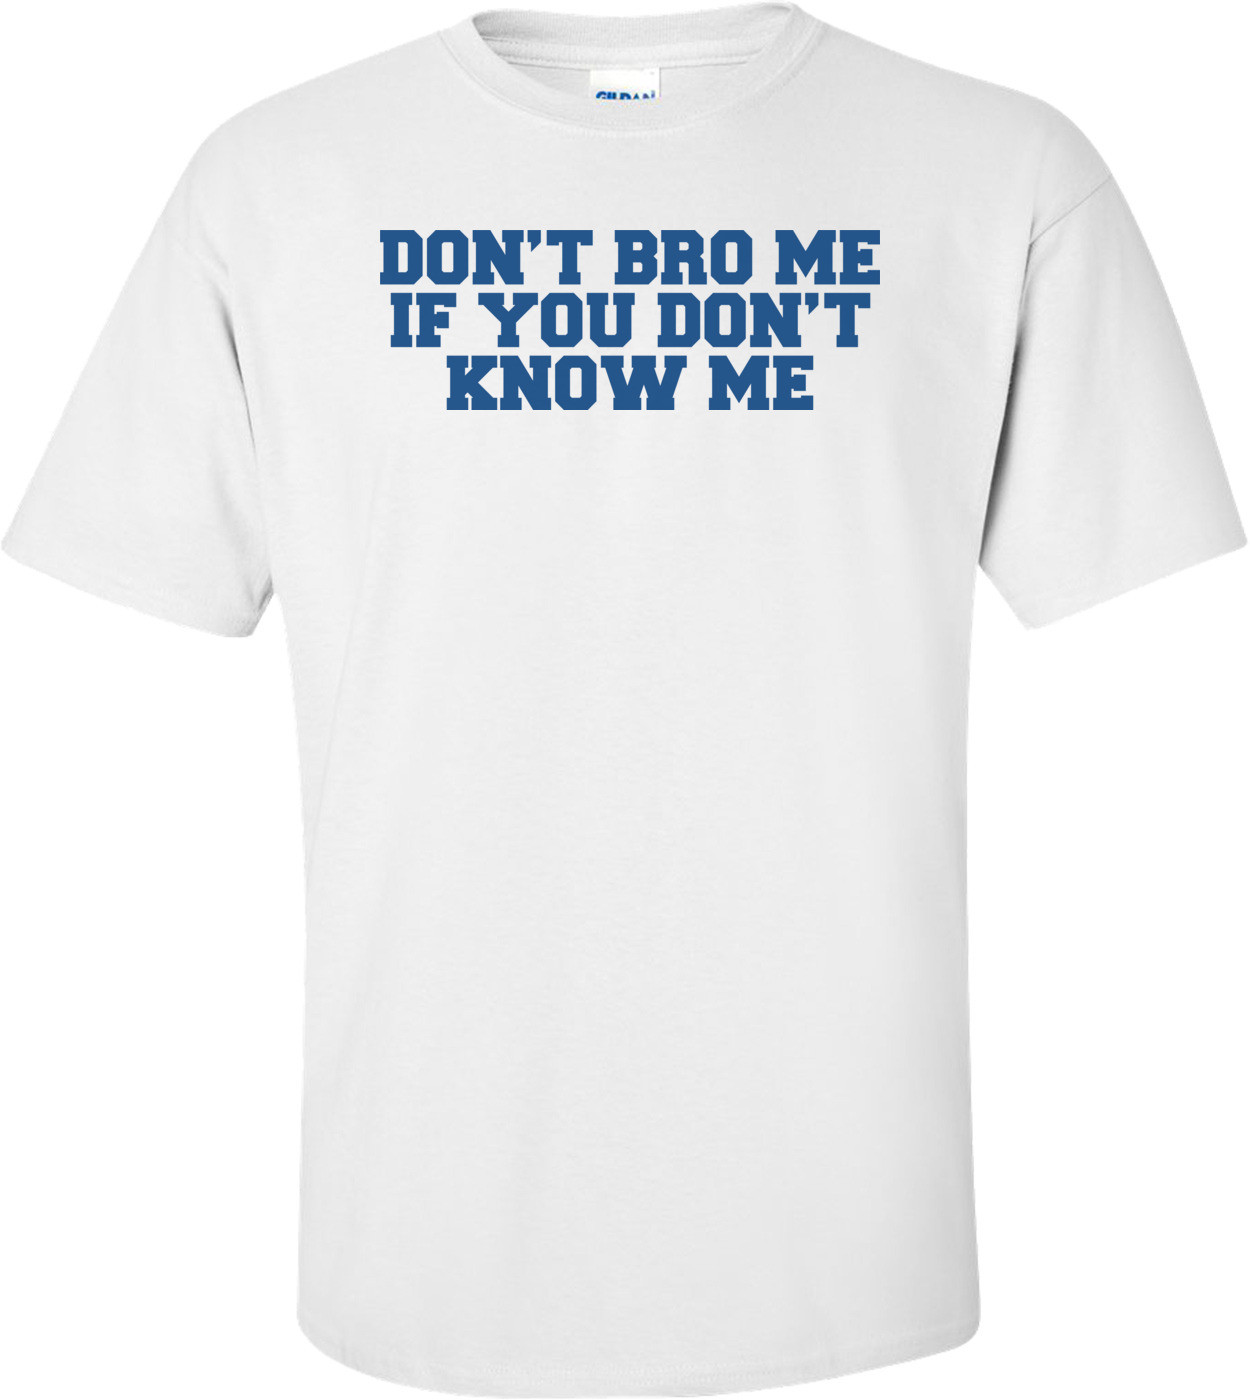 Don't Bro Me If You Don't Know Me Shirt